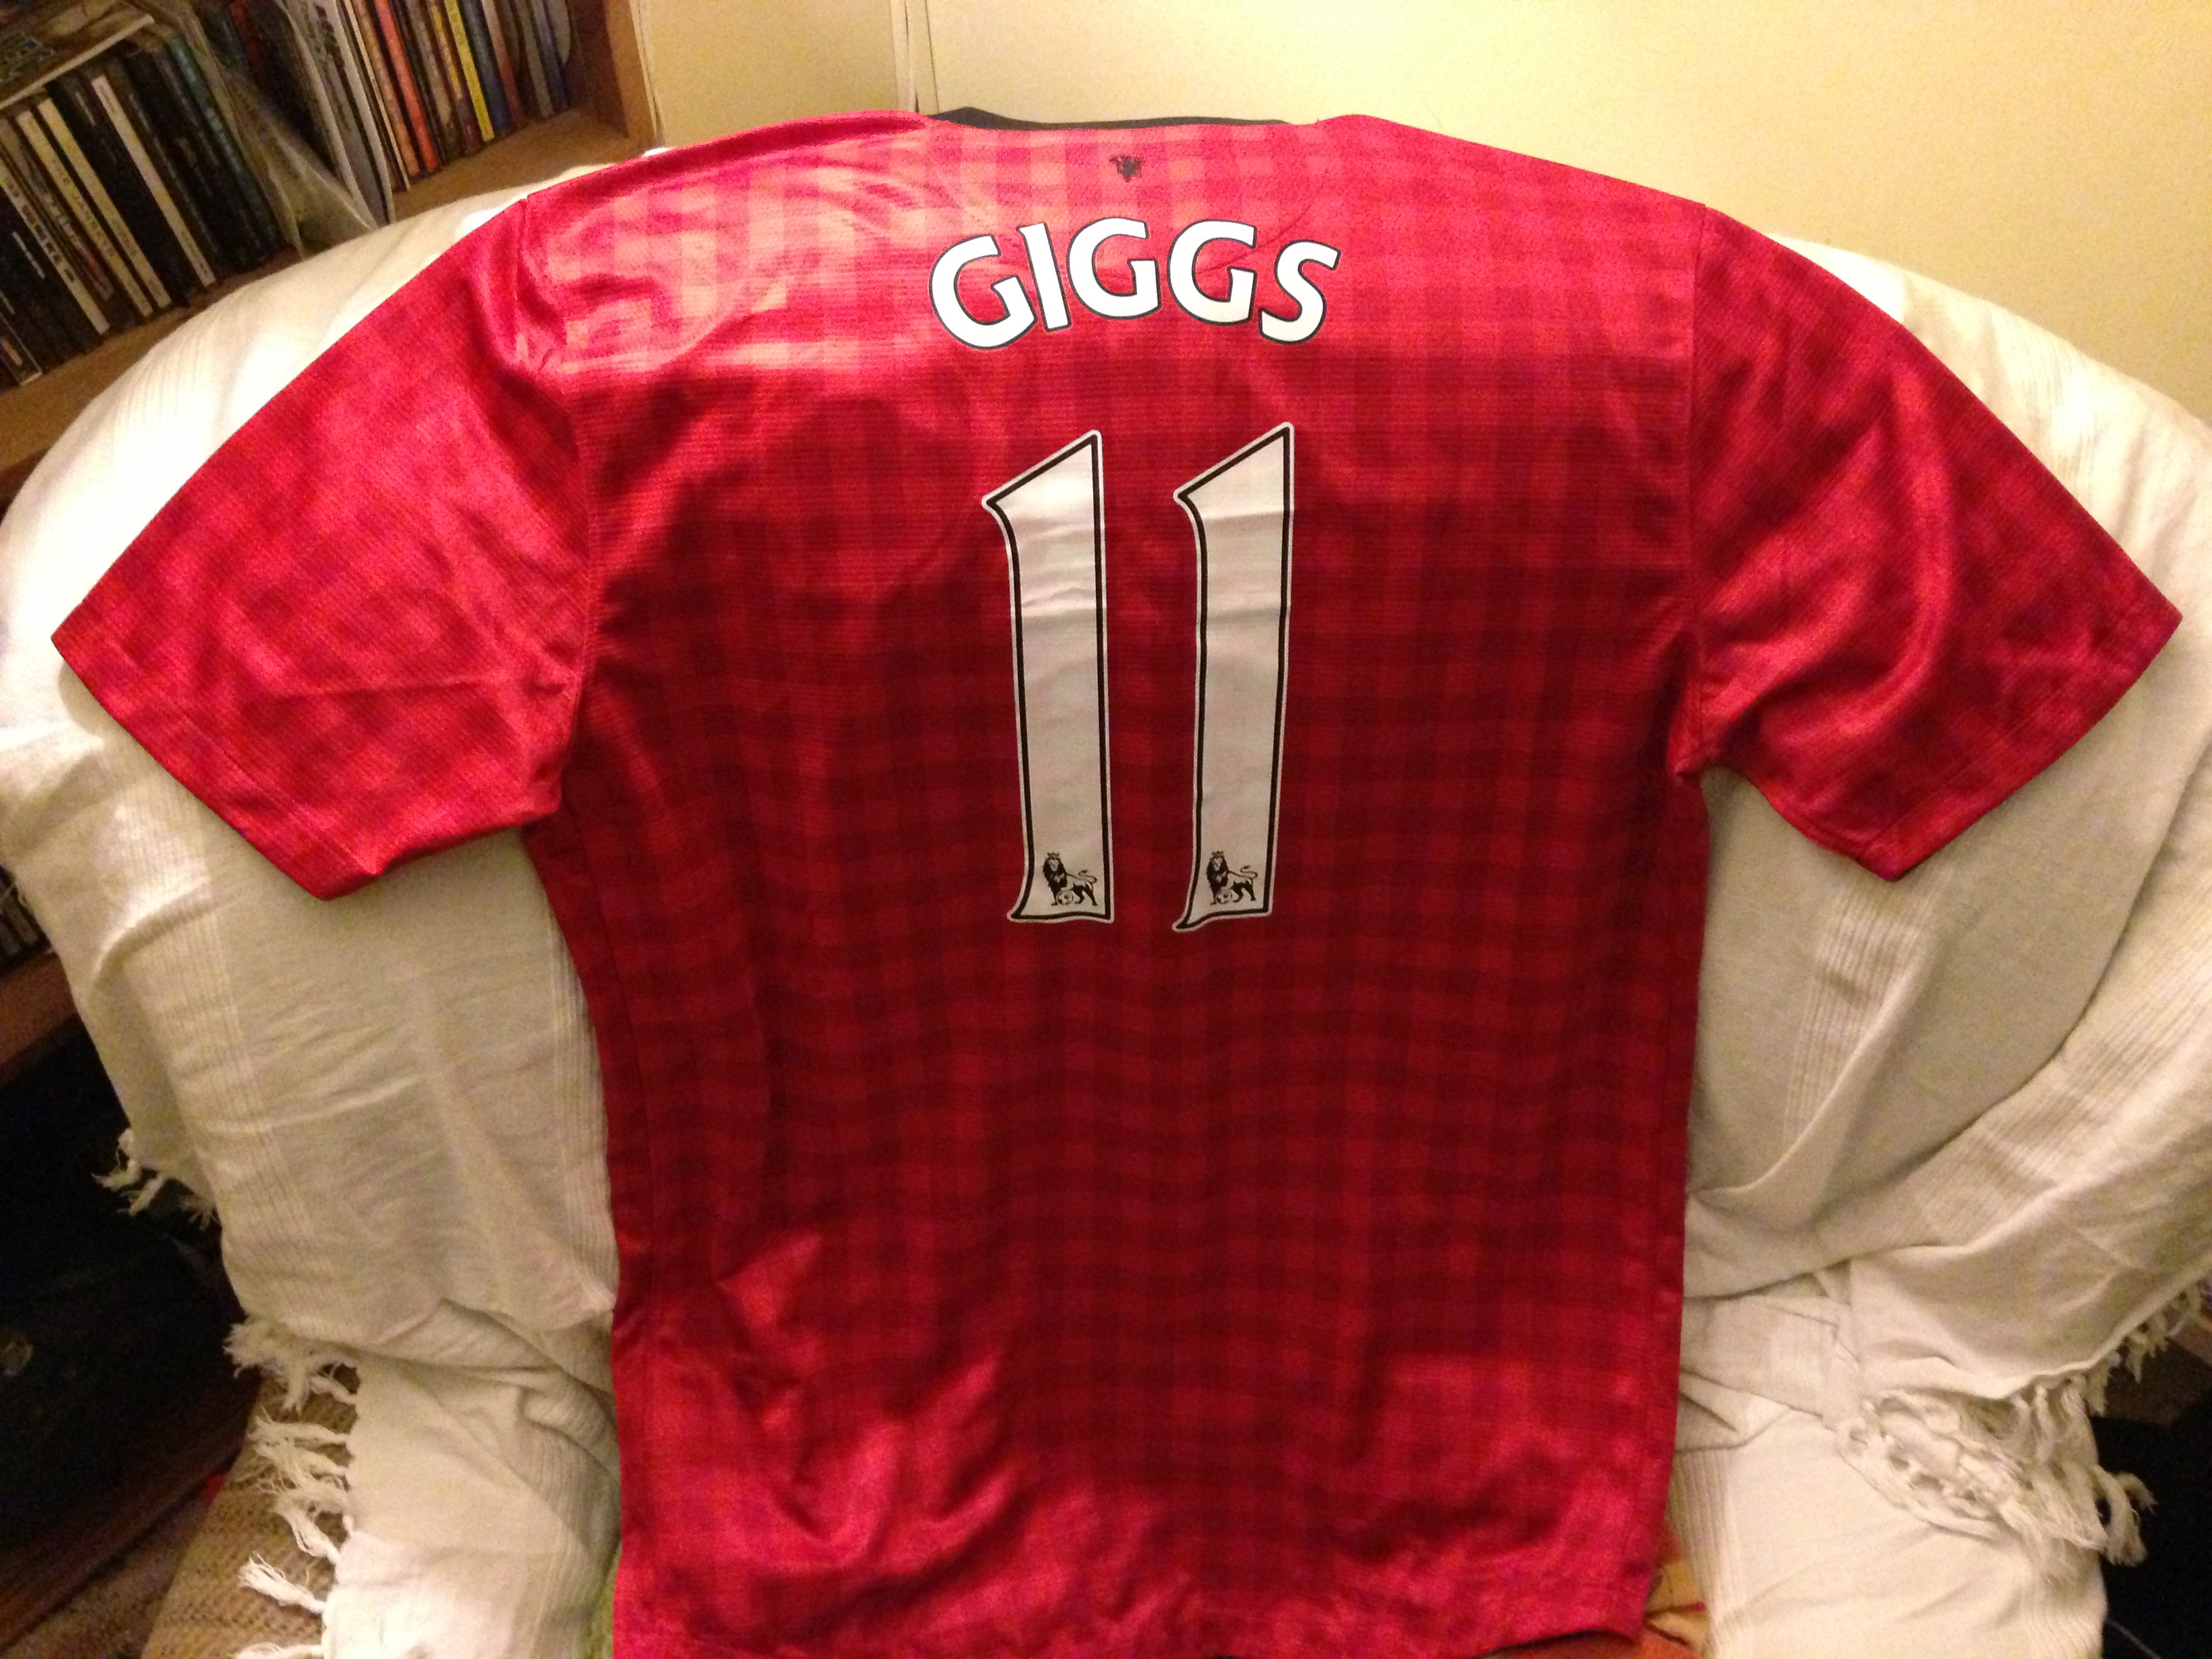 WIN a Ryan Giggs Signed Shirt courtesy of Epson Europe